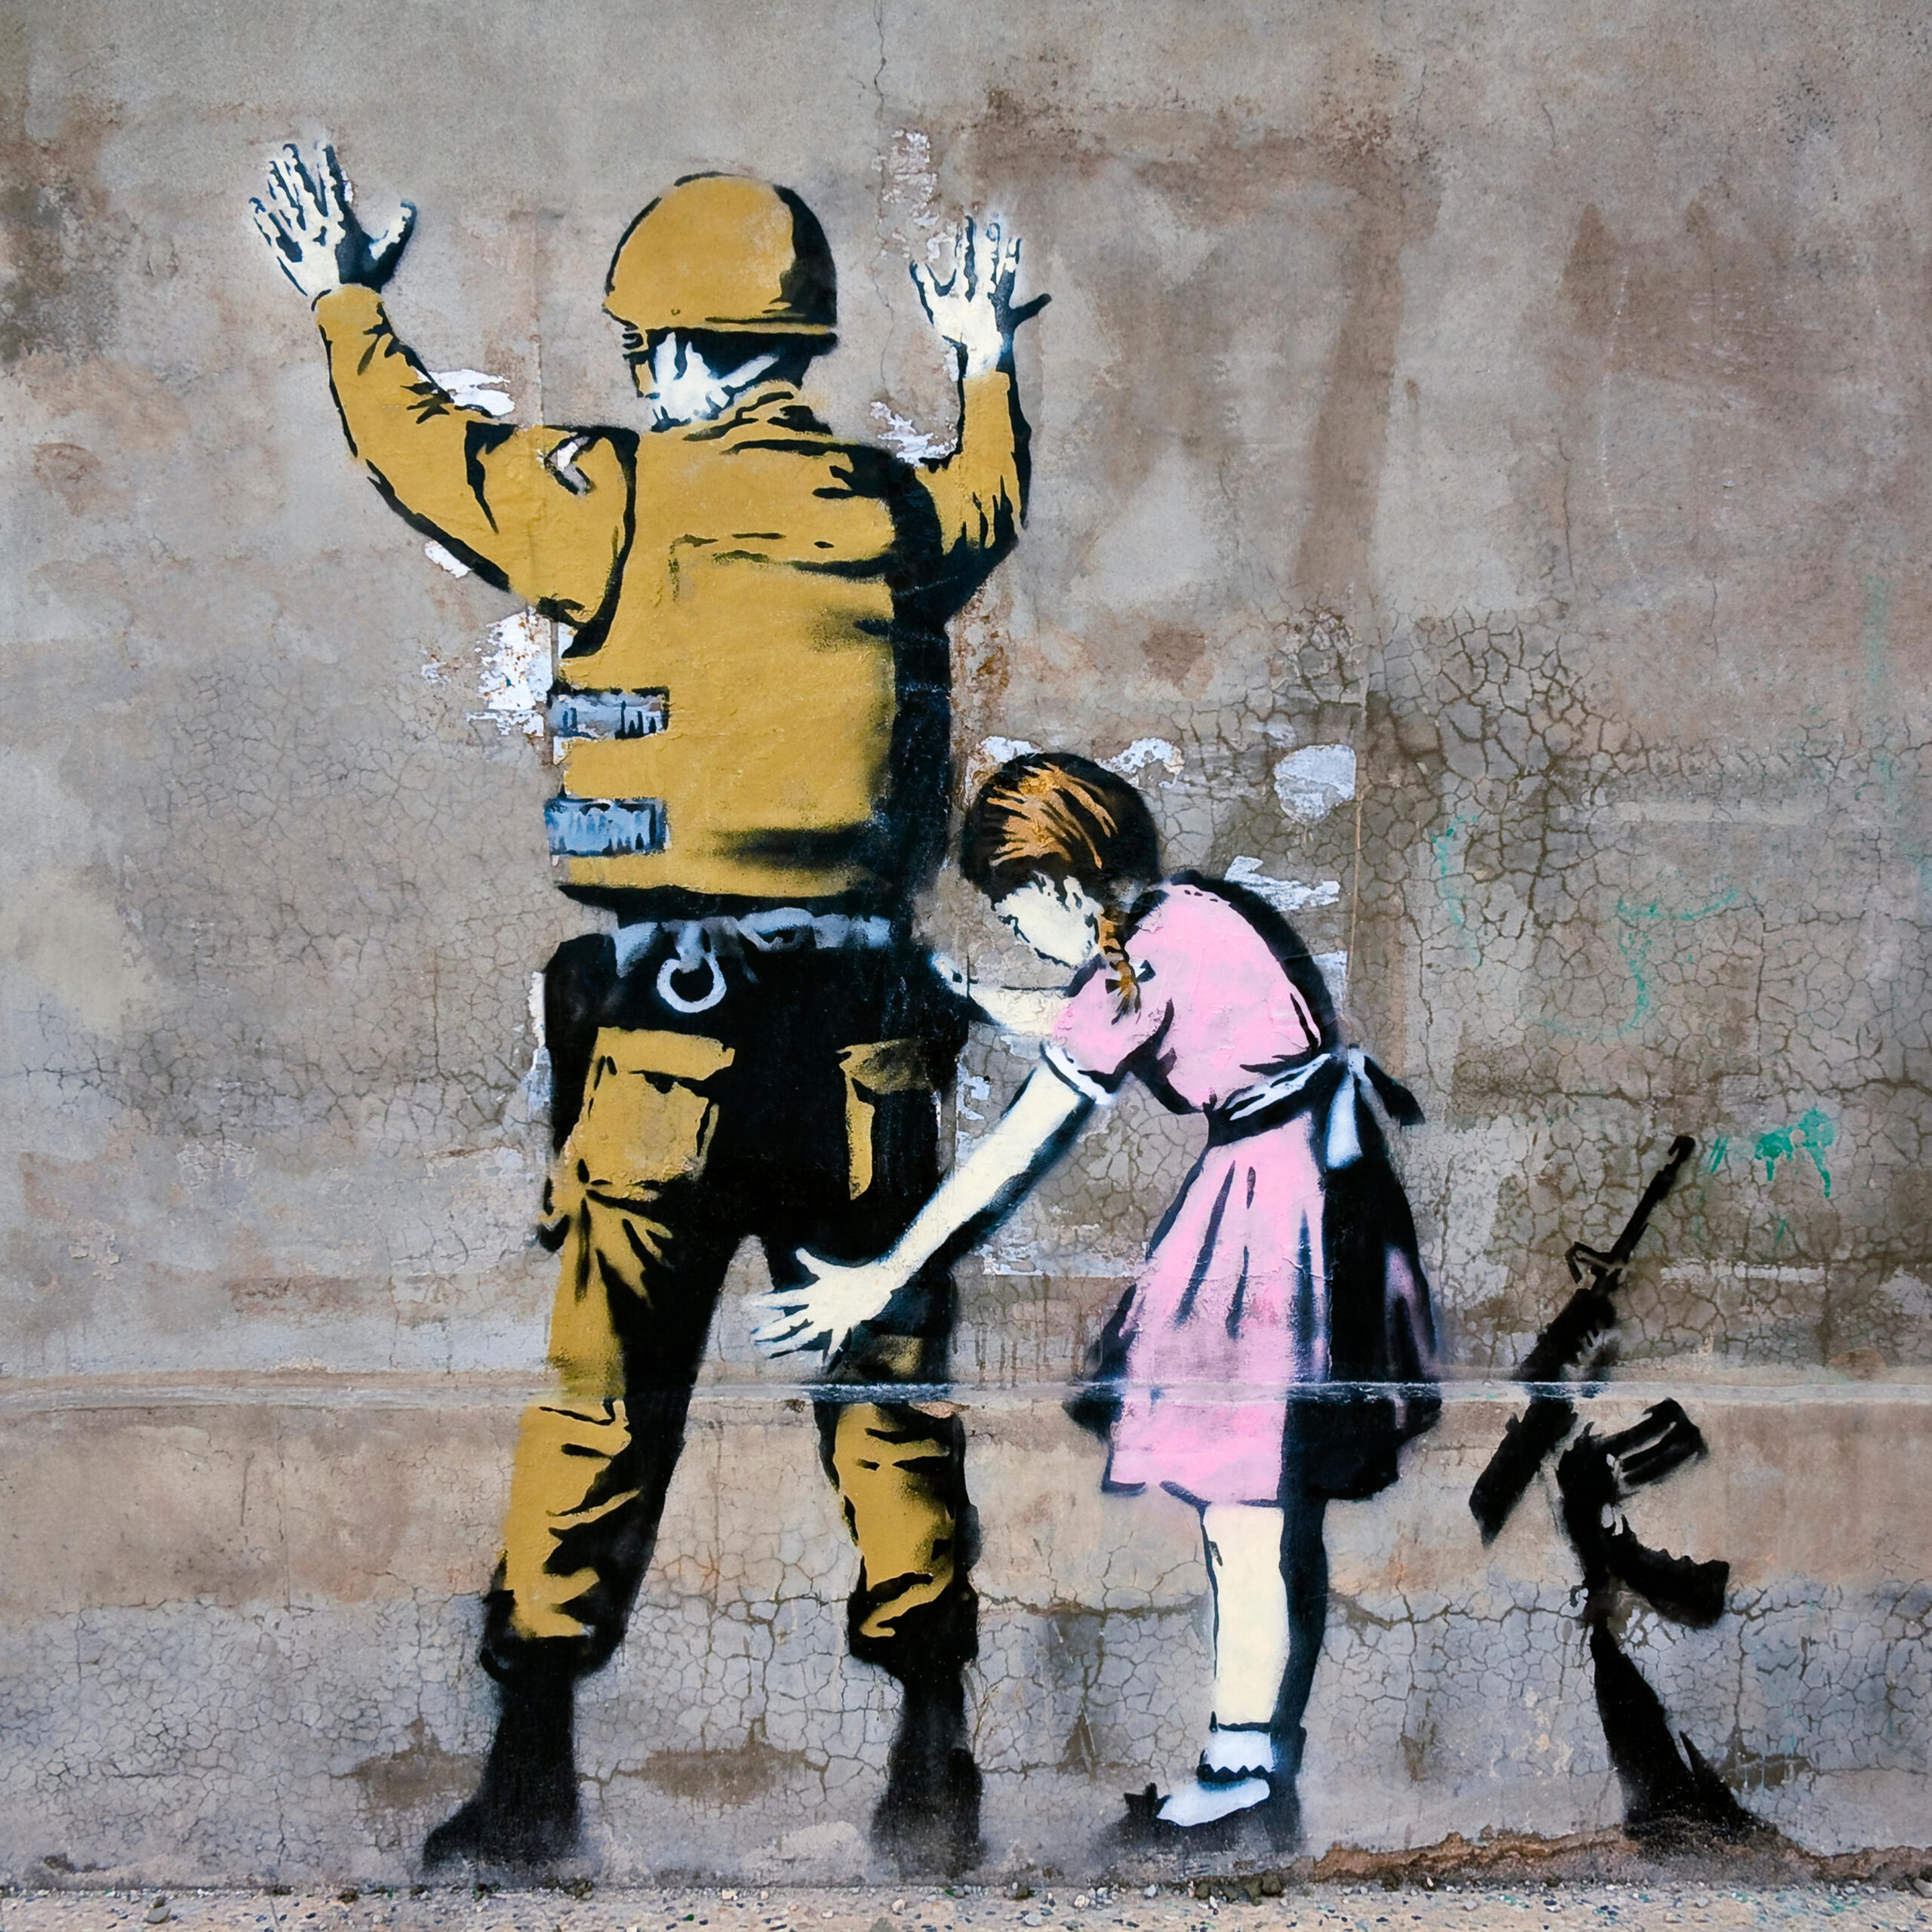 Banksy's work has made him famous worldwide